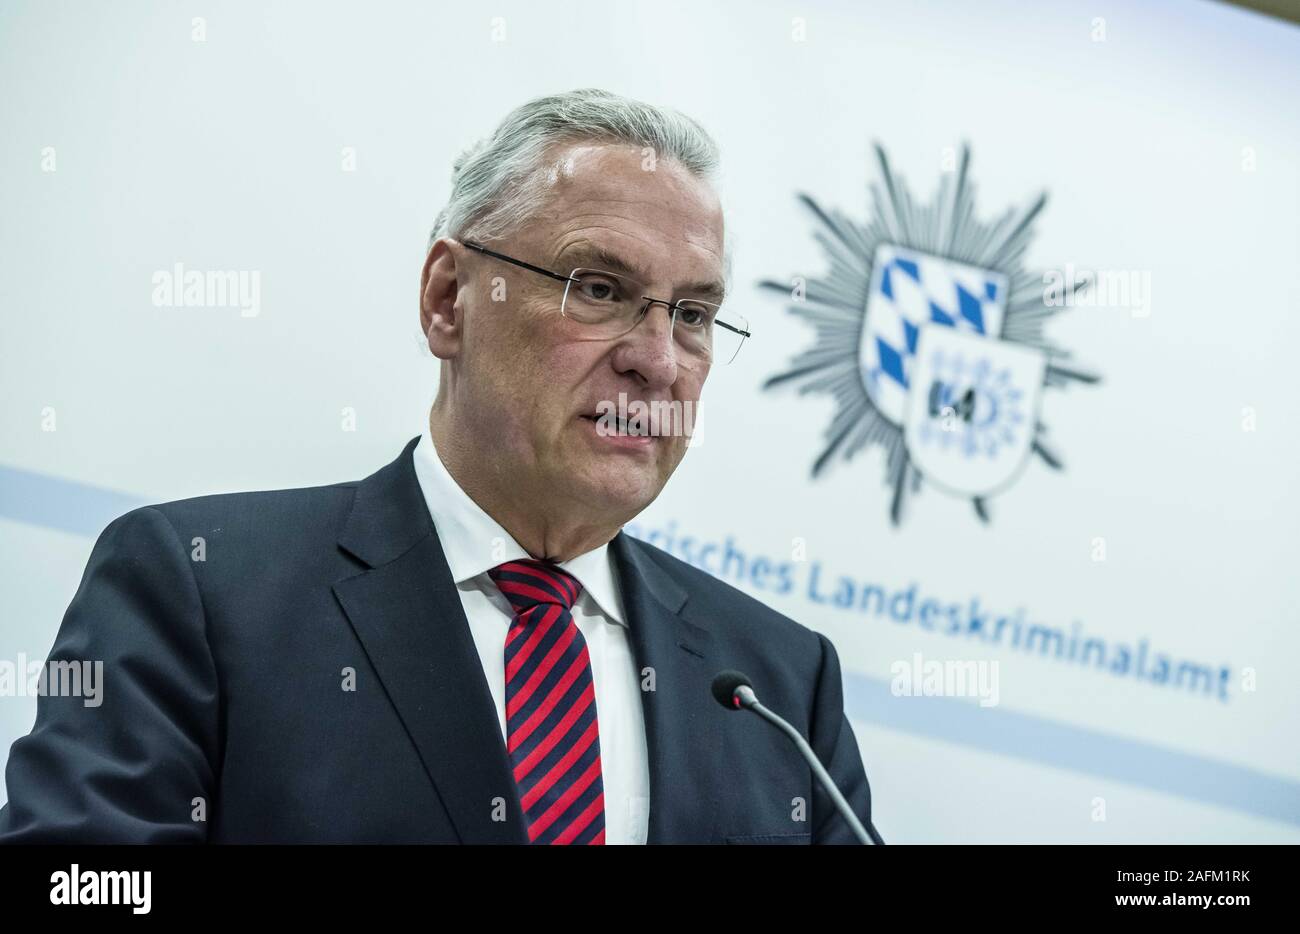 Munich, Bavaria, Germany. 16th Dec, 2019. JOACHIM HERRMAN, Bavarian Interior Minister. Bavarian Interior Minister Joachim Herrmann, Justice Minister George Eisenreich, Bavarian Landeskriminalamt (Crime Office) preisdent Robert Heimberger, and Bavarian Attorney General Reinhard RÃ¶ttle (Reinhard Roettle) presented the results of the war on organized crime in Bavaria, In 2018 alone, the damages to the state totaled some 169 million Euros, a staggering increase from 2017's figure of 12 million. Processes against organized crime have cost the state some 76 million Euros. In addition to org Stock Photo